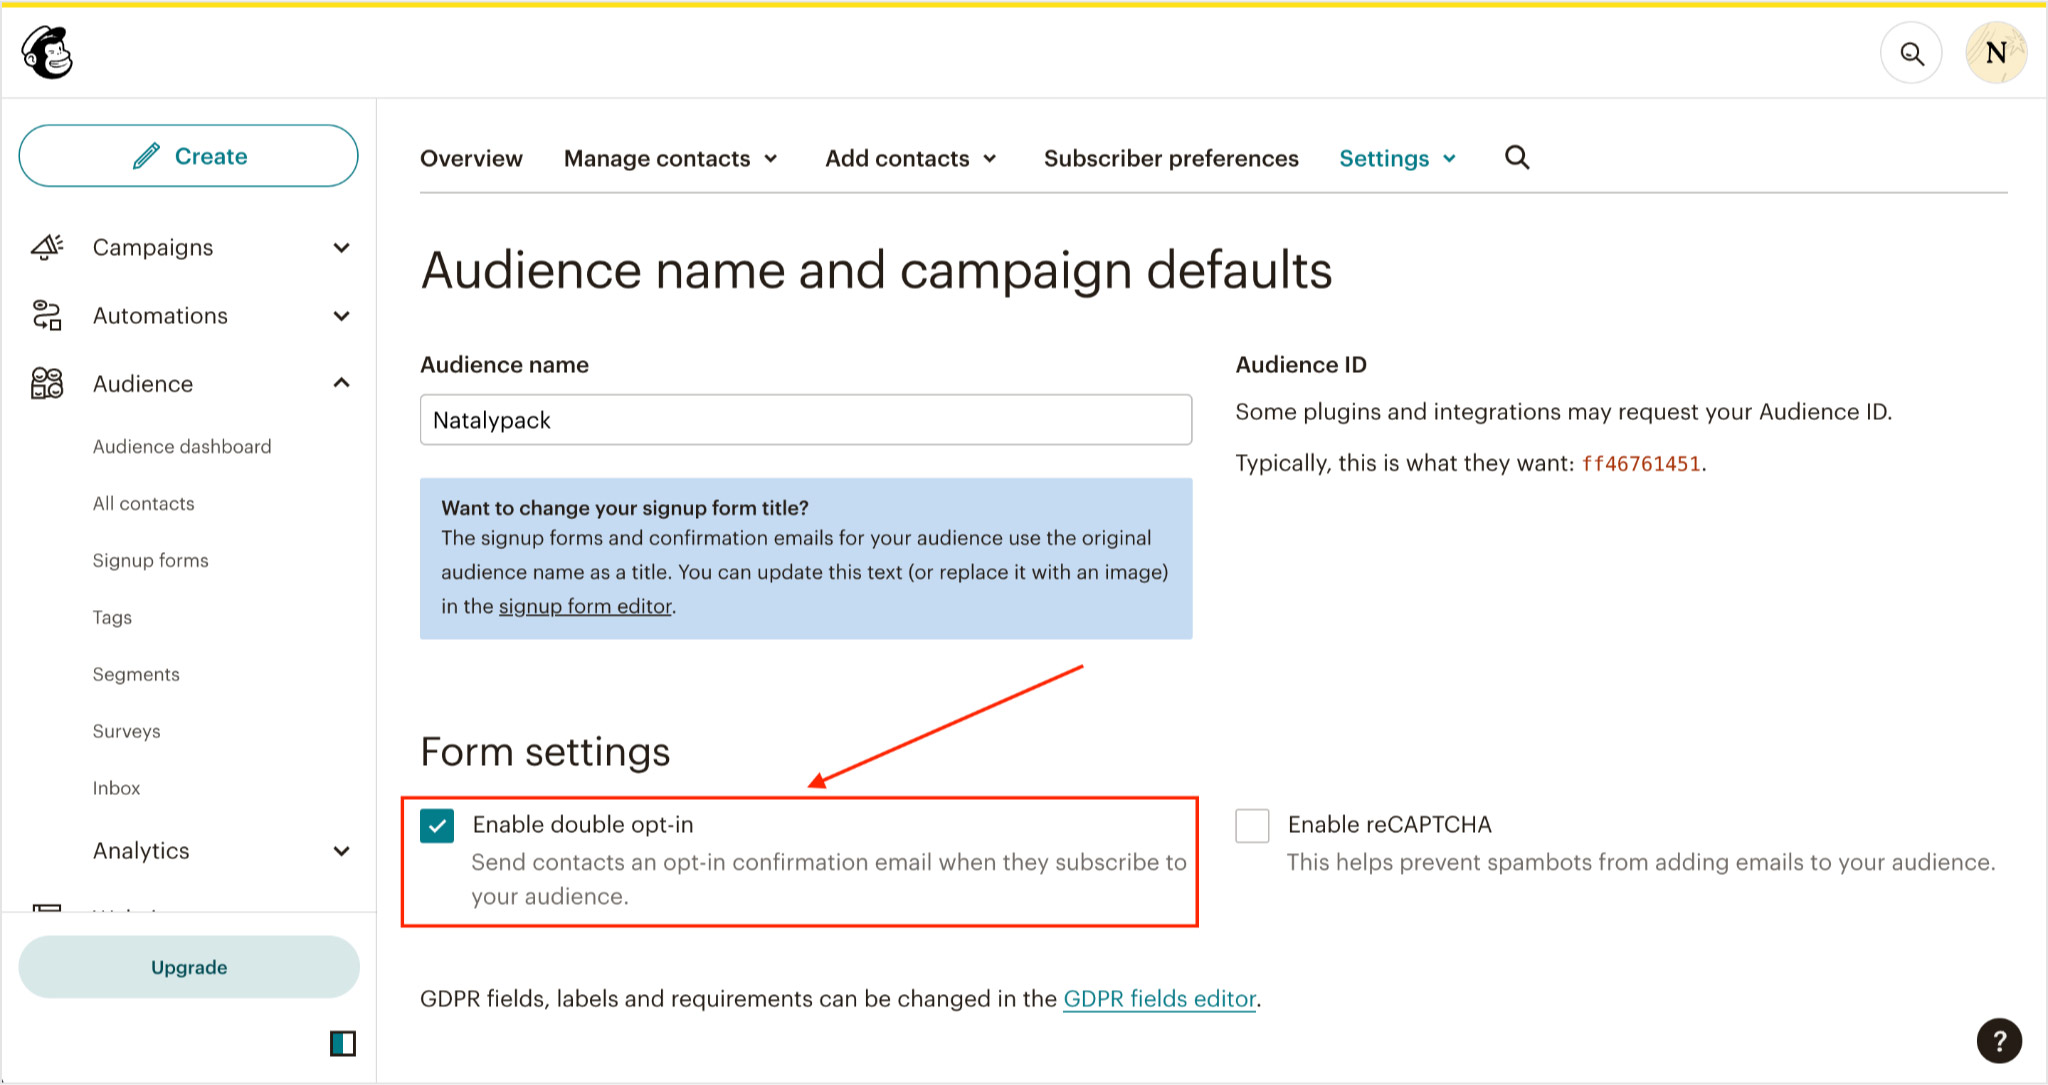 go to the mailchimp account audience settings and check the enable double opt-in checkbox there as well